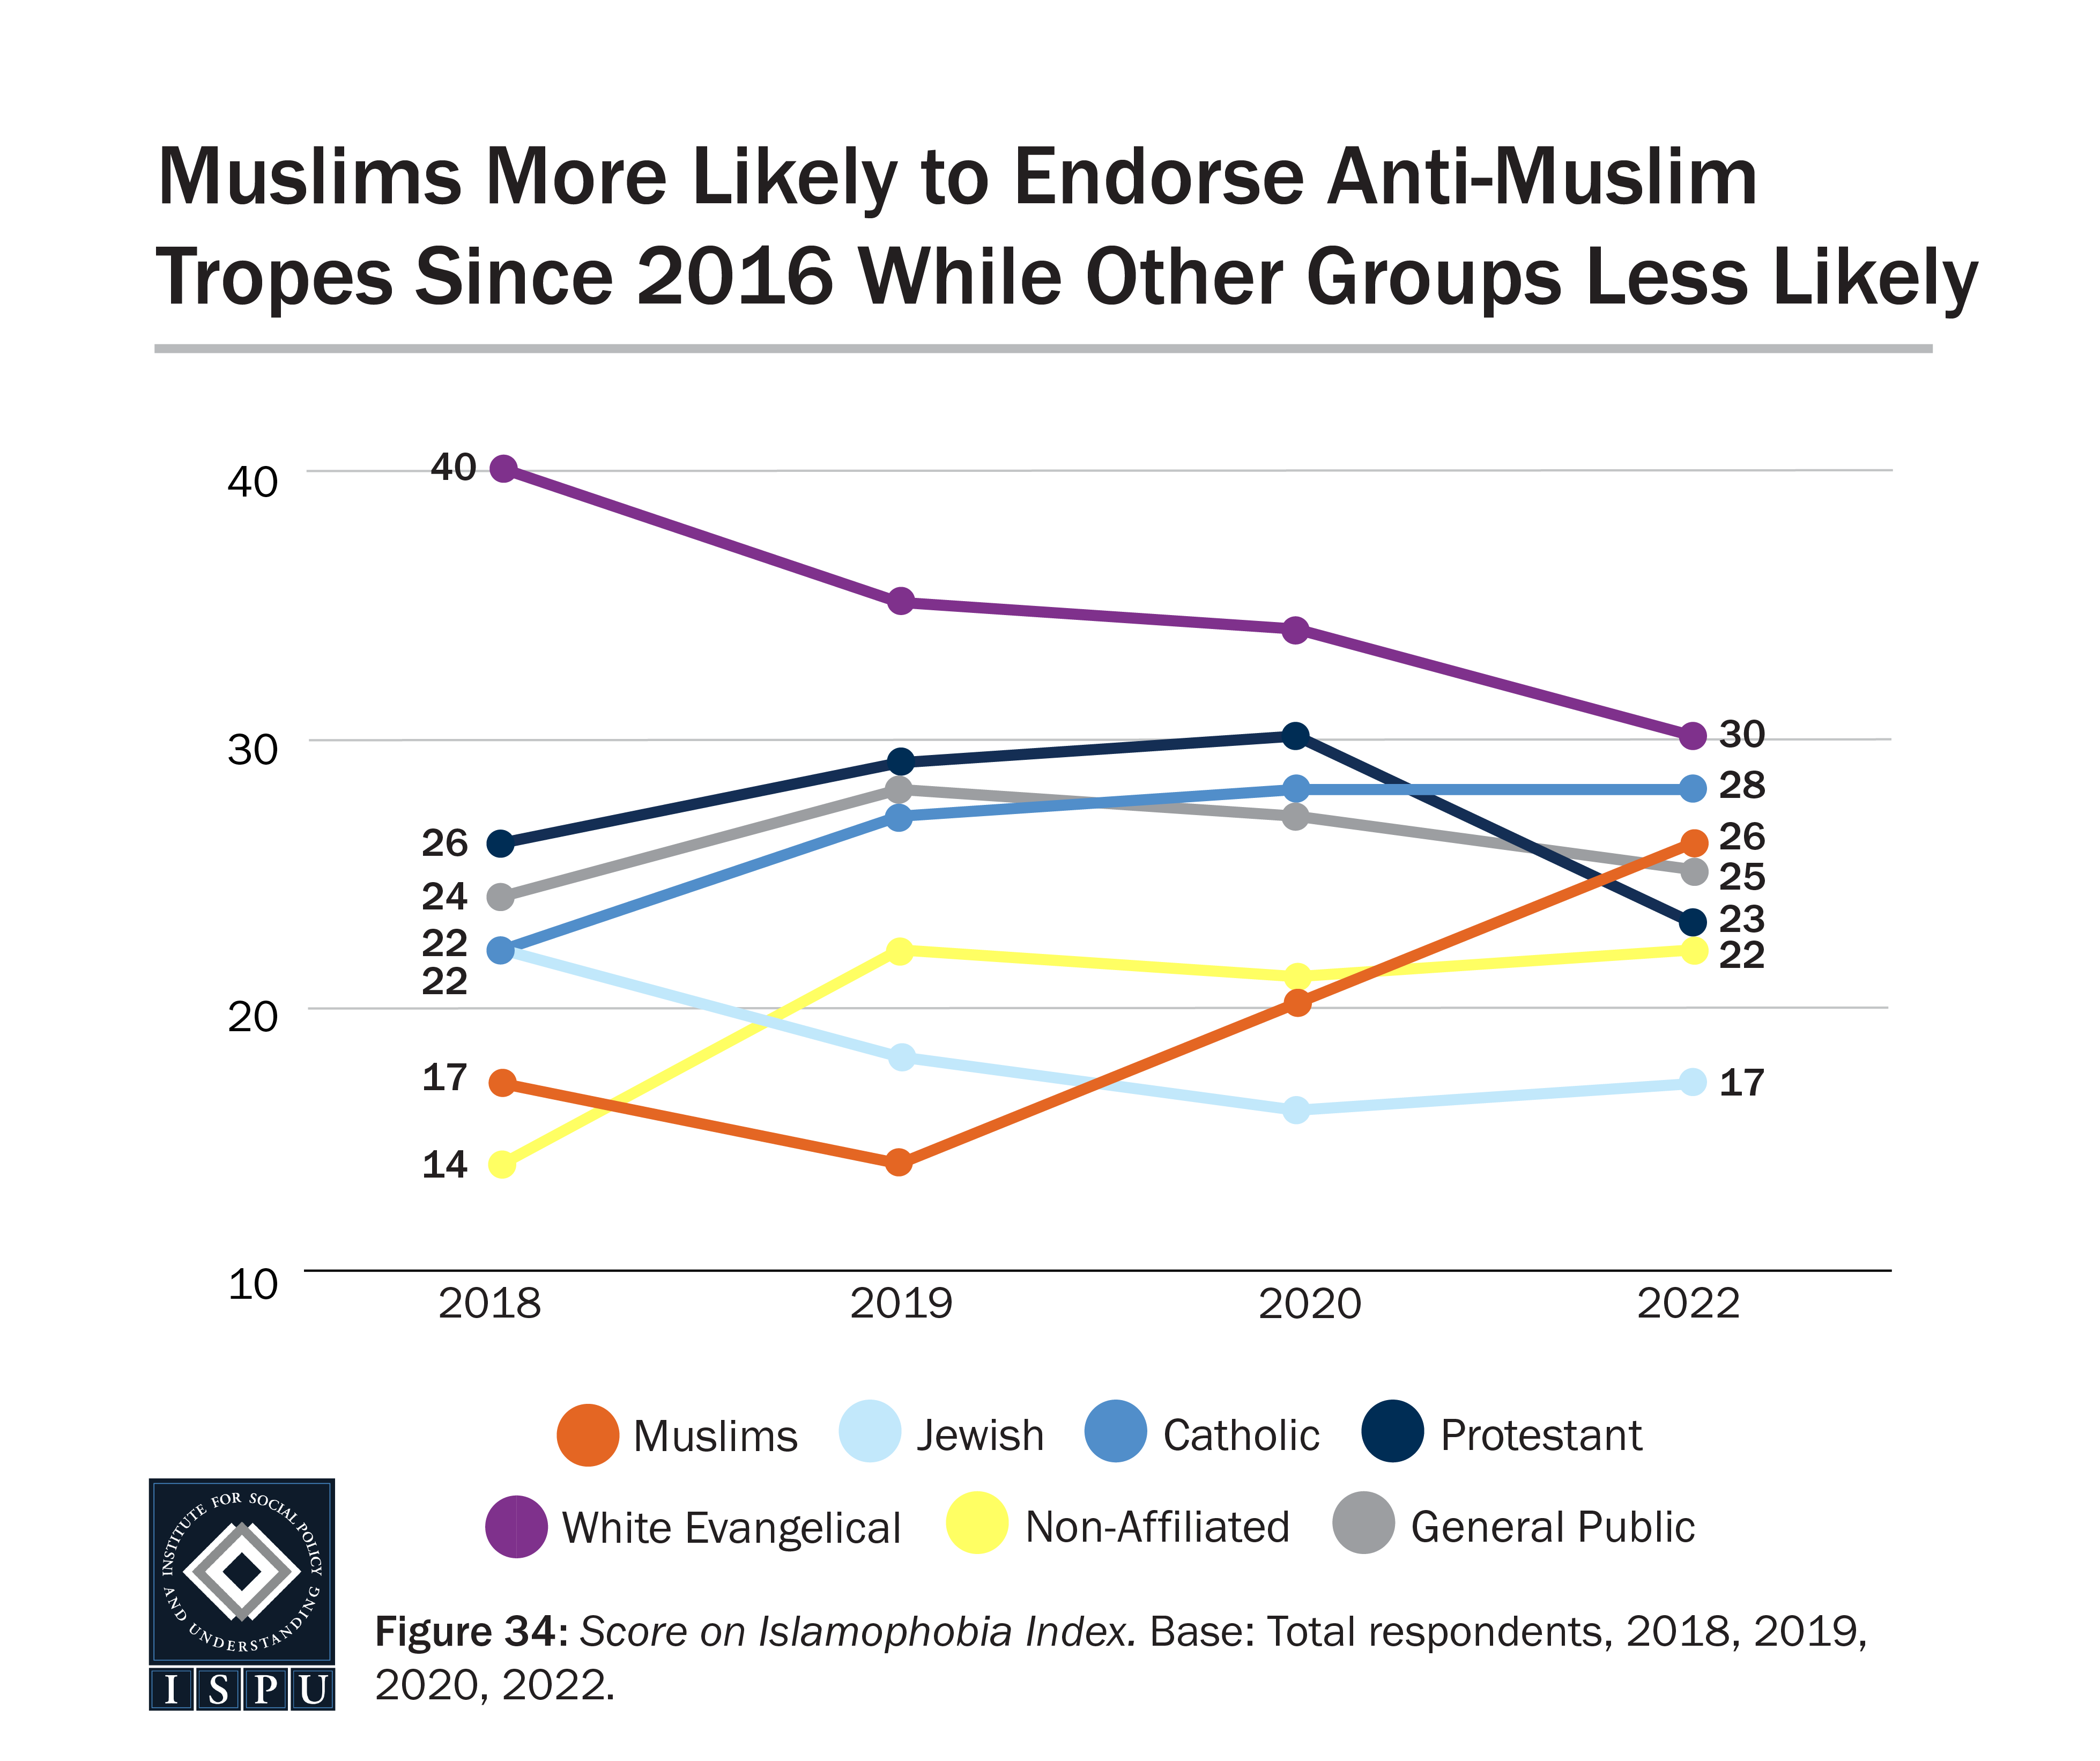 A line graph showing scores on the Islamophobia Index from 2018 - 2022 for each group surveyed.